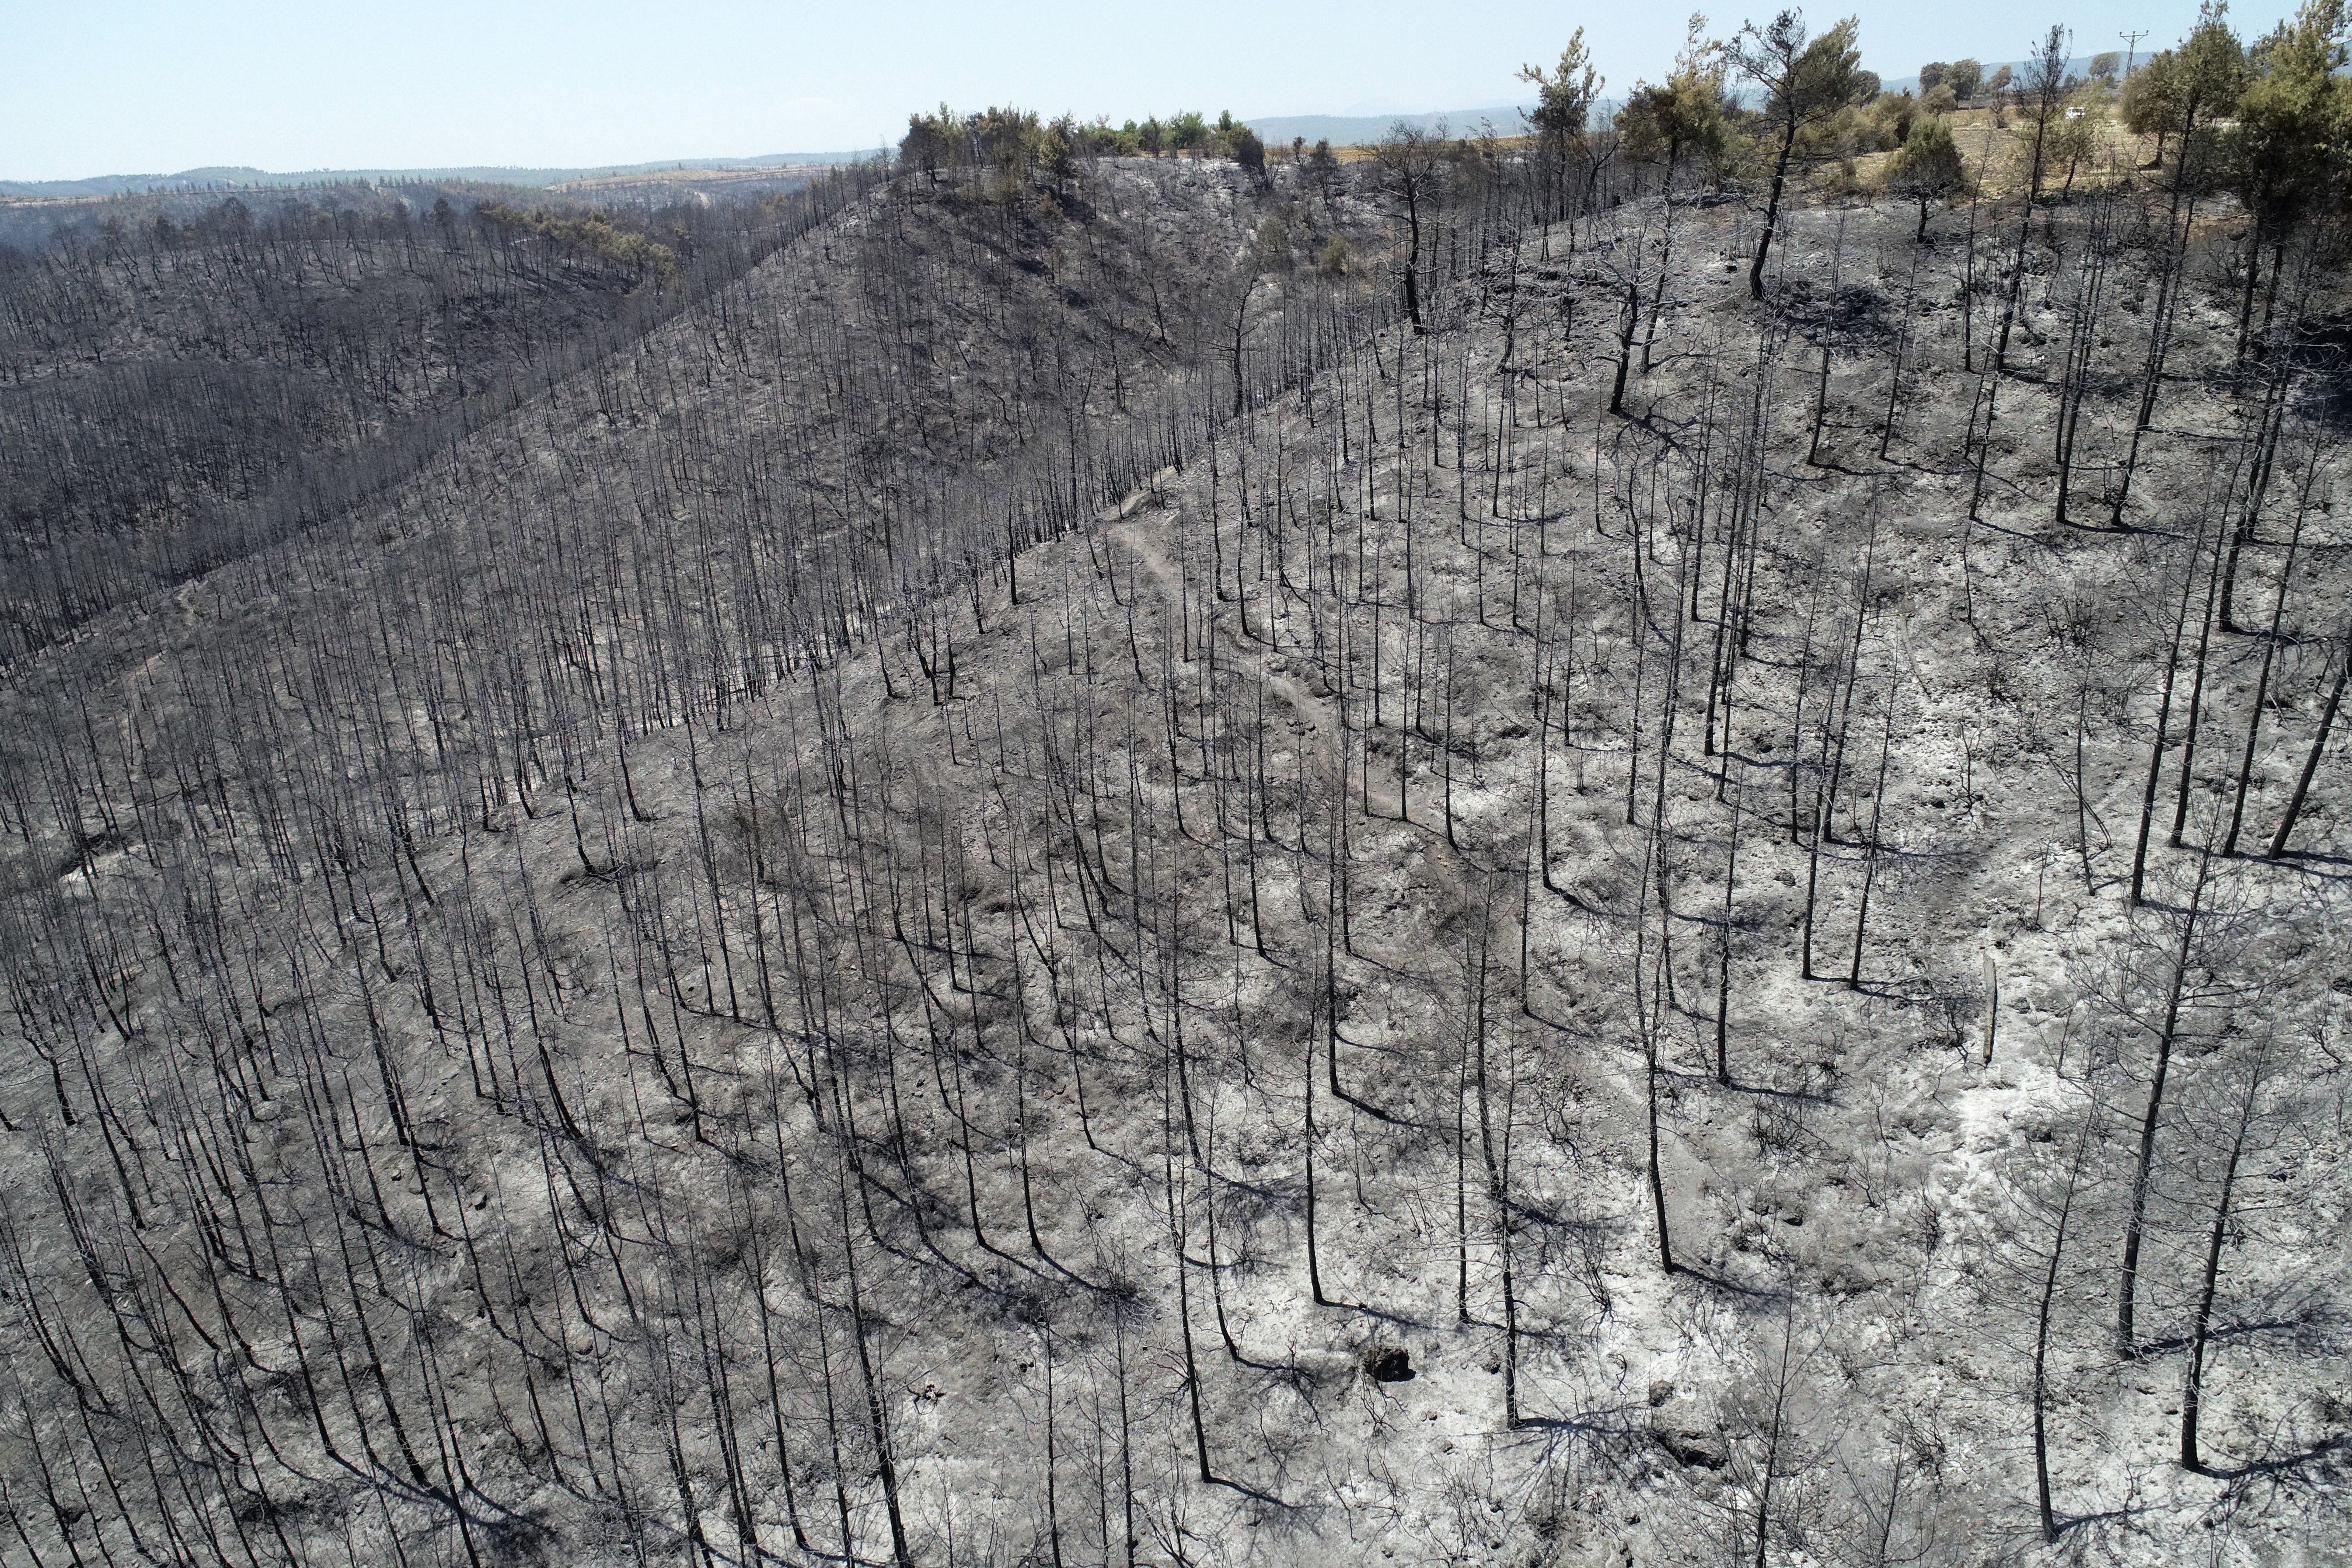 An aerial view of damaged areas after a forest fire in Adana, Turkey on July 31, 2021